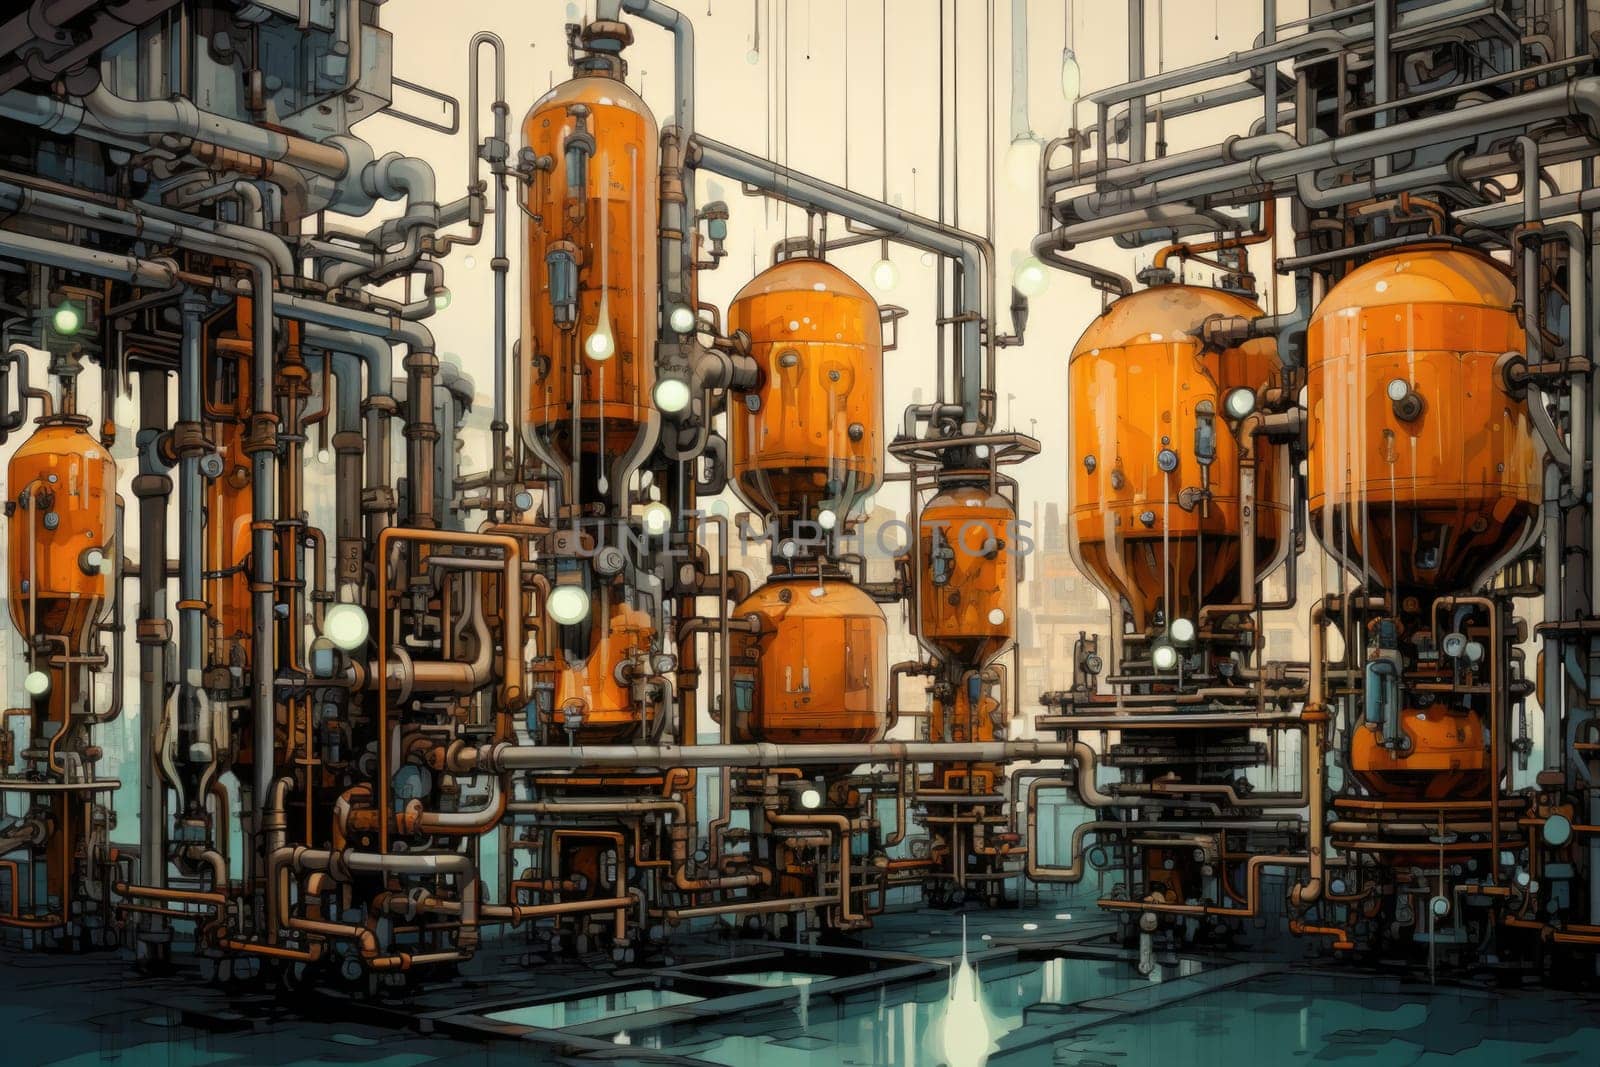 Industrial zone, oil refining equipment, Modern technologies by Lobachad